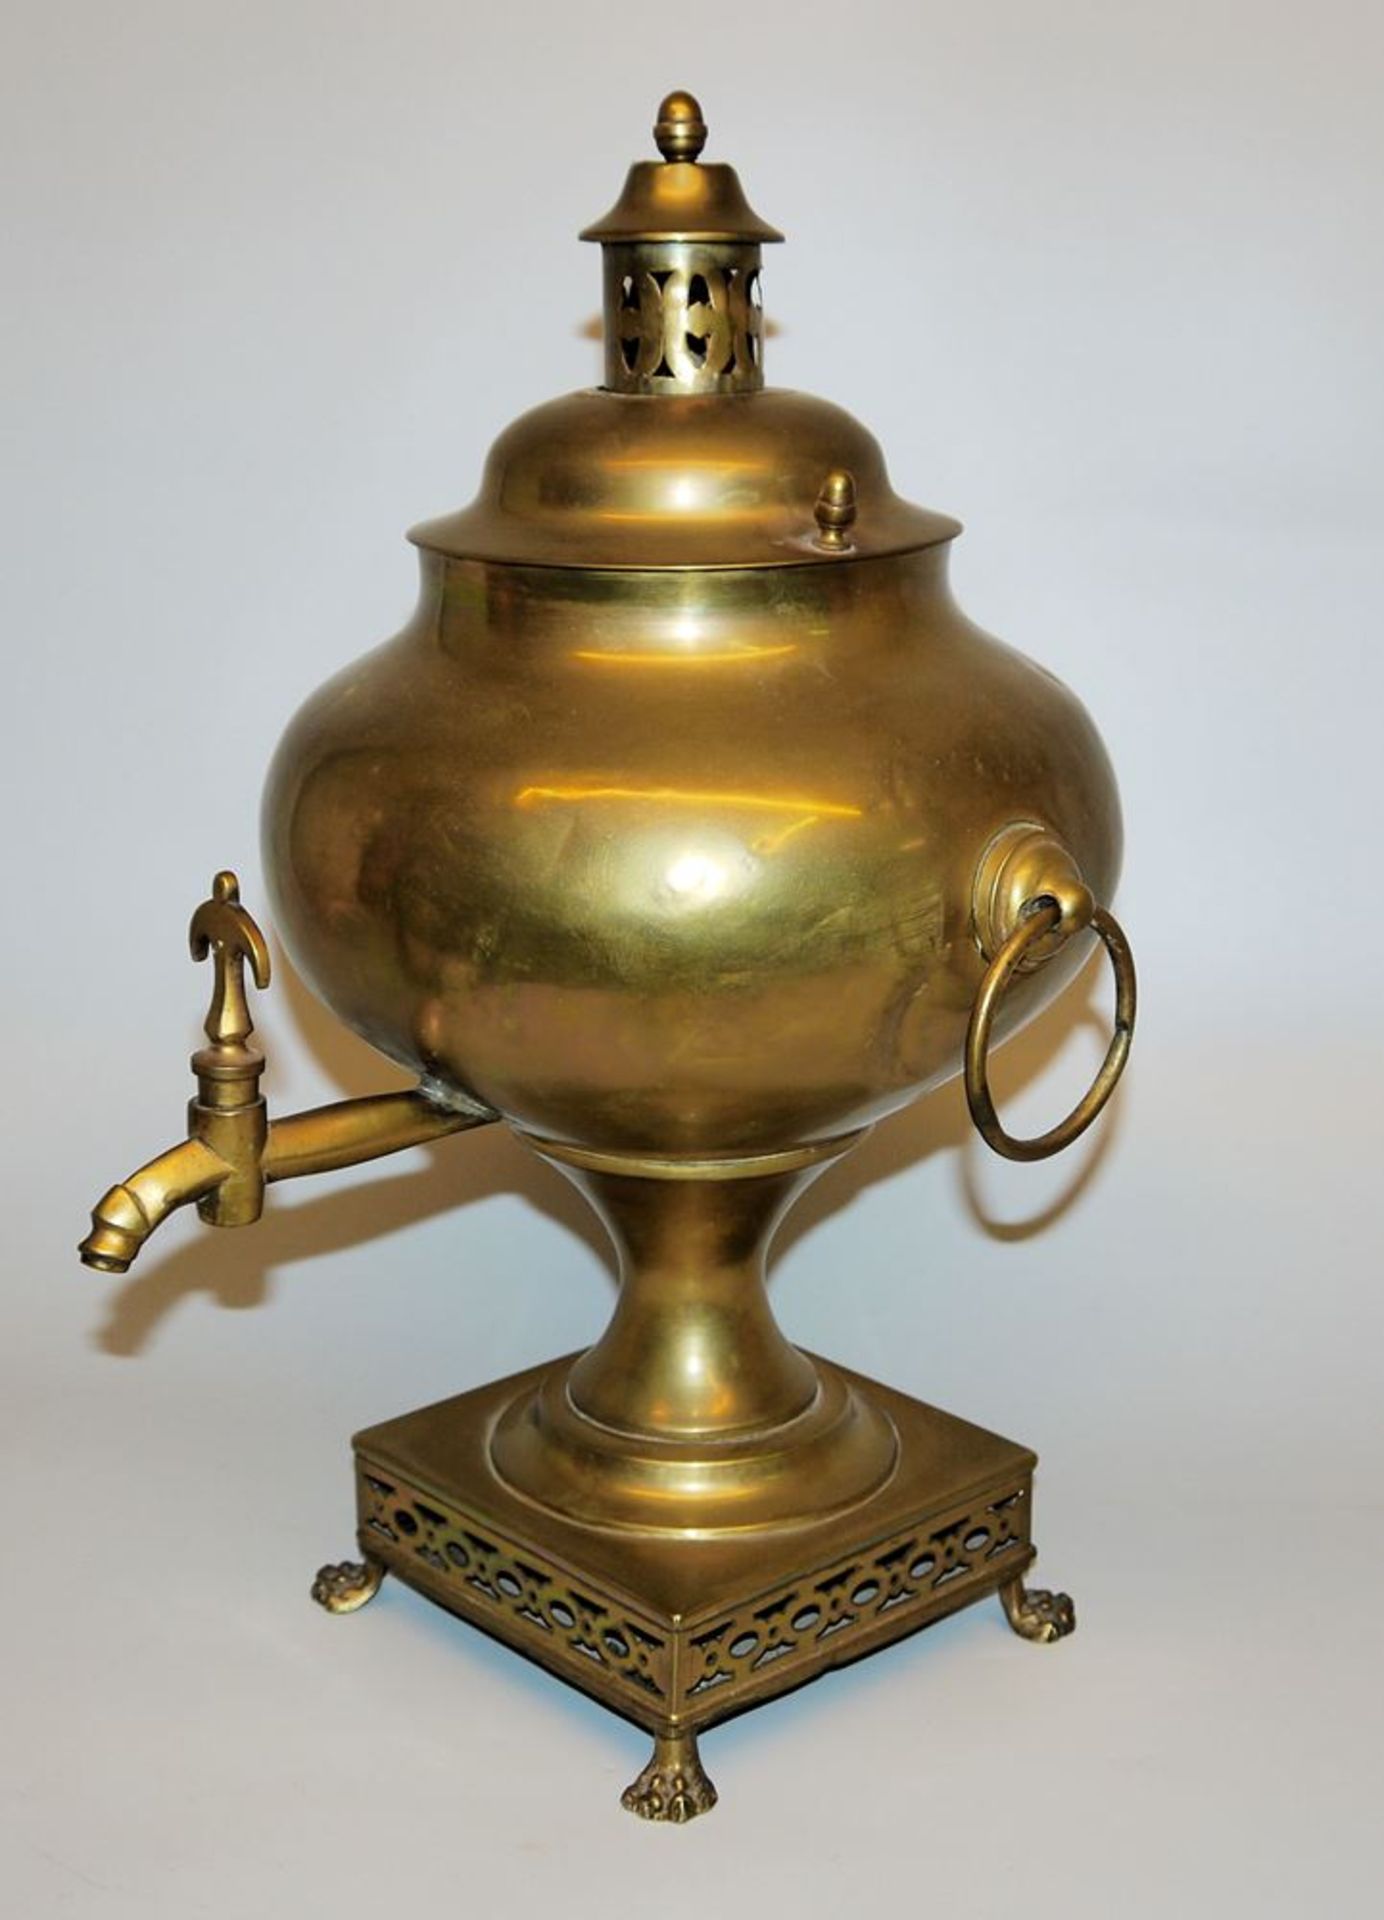 Samovar/ hot water container, brass, mid 19th century